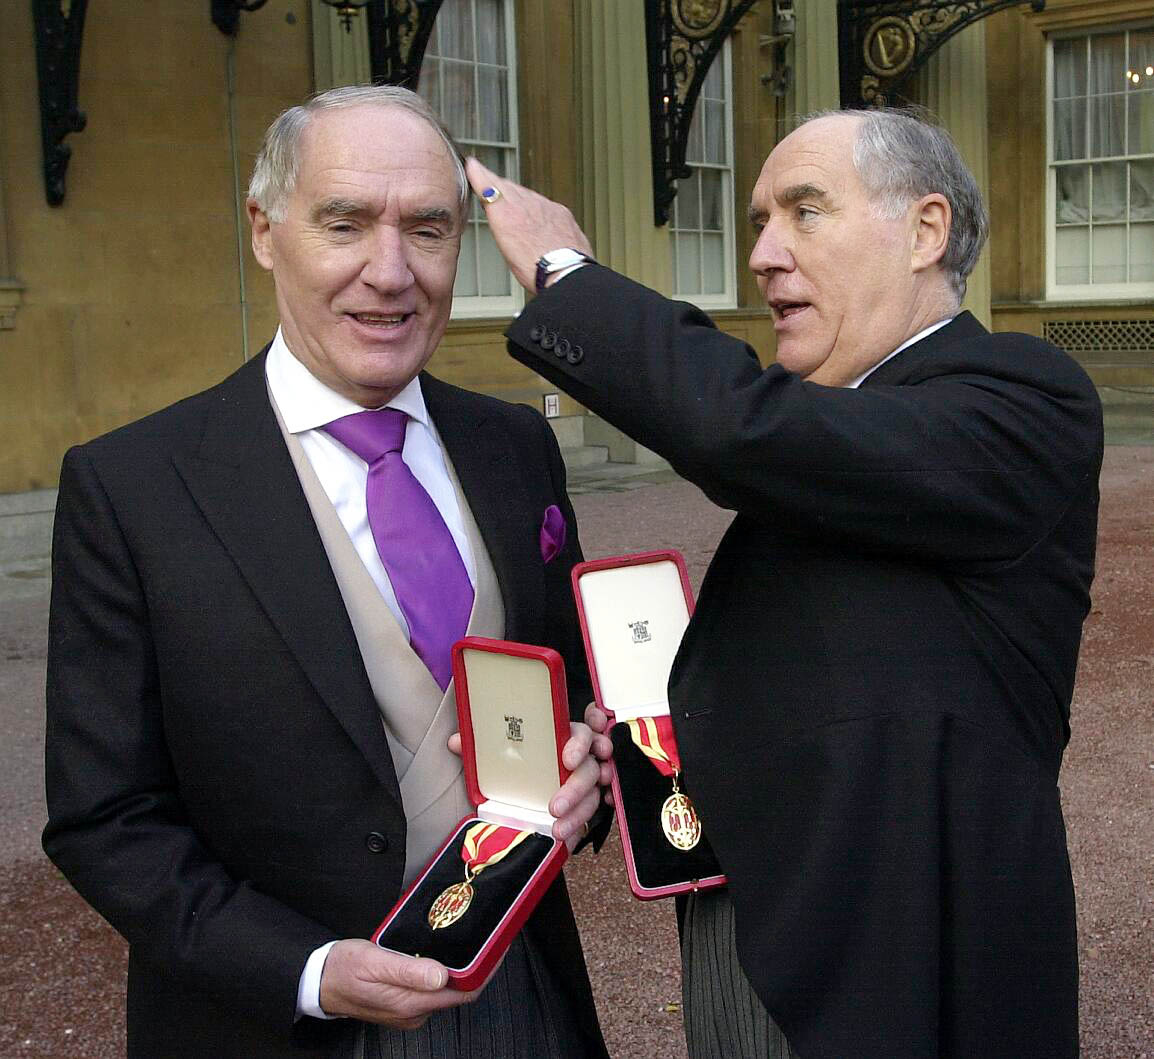 Sir David Barclay, left, joint-owner of the The Daily Telegraph, has died after a short illness aged 86.